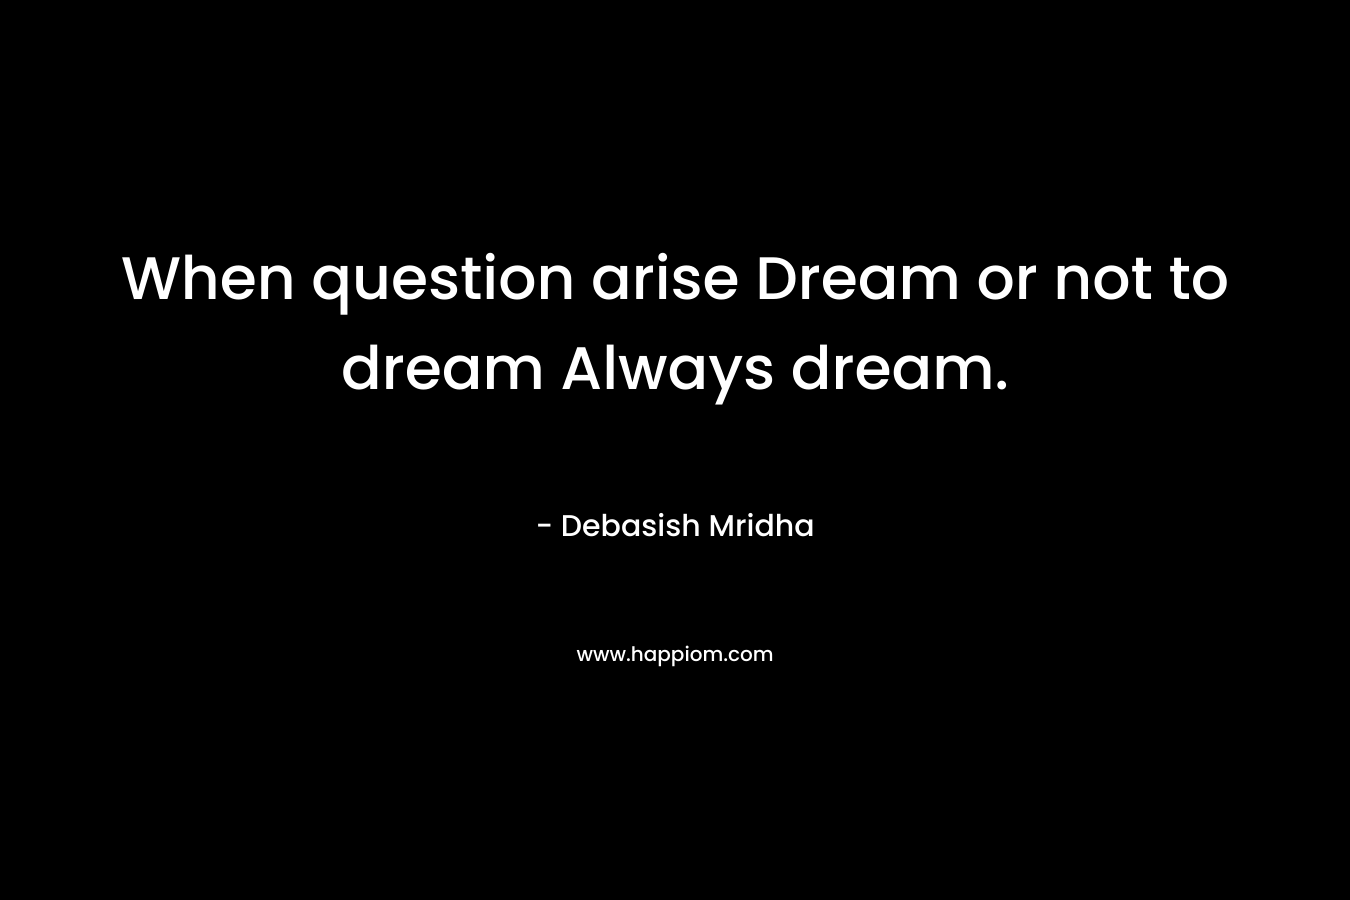 When question arise Dream or not to dream Always dream.